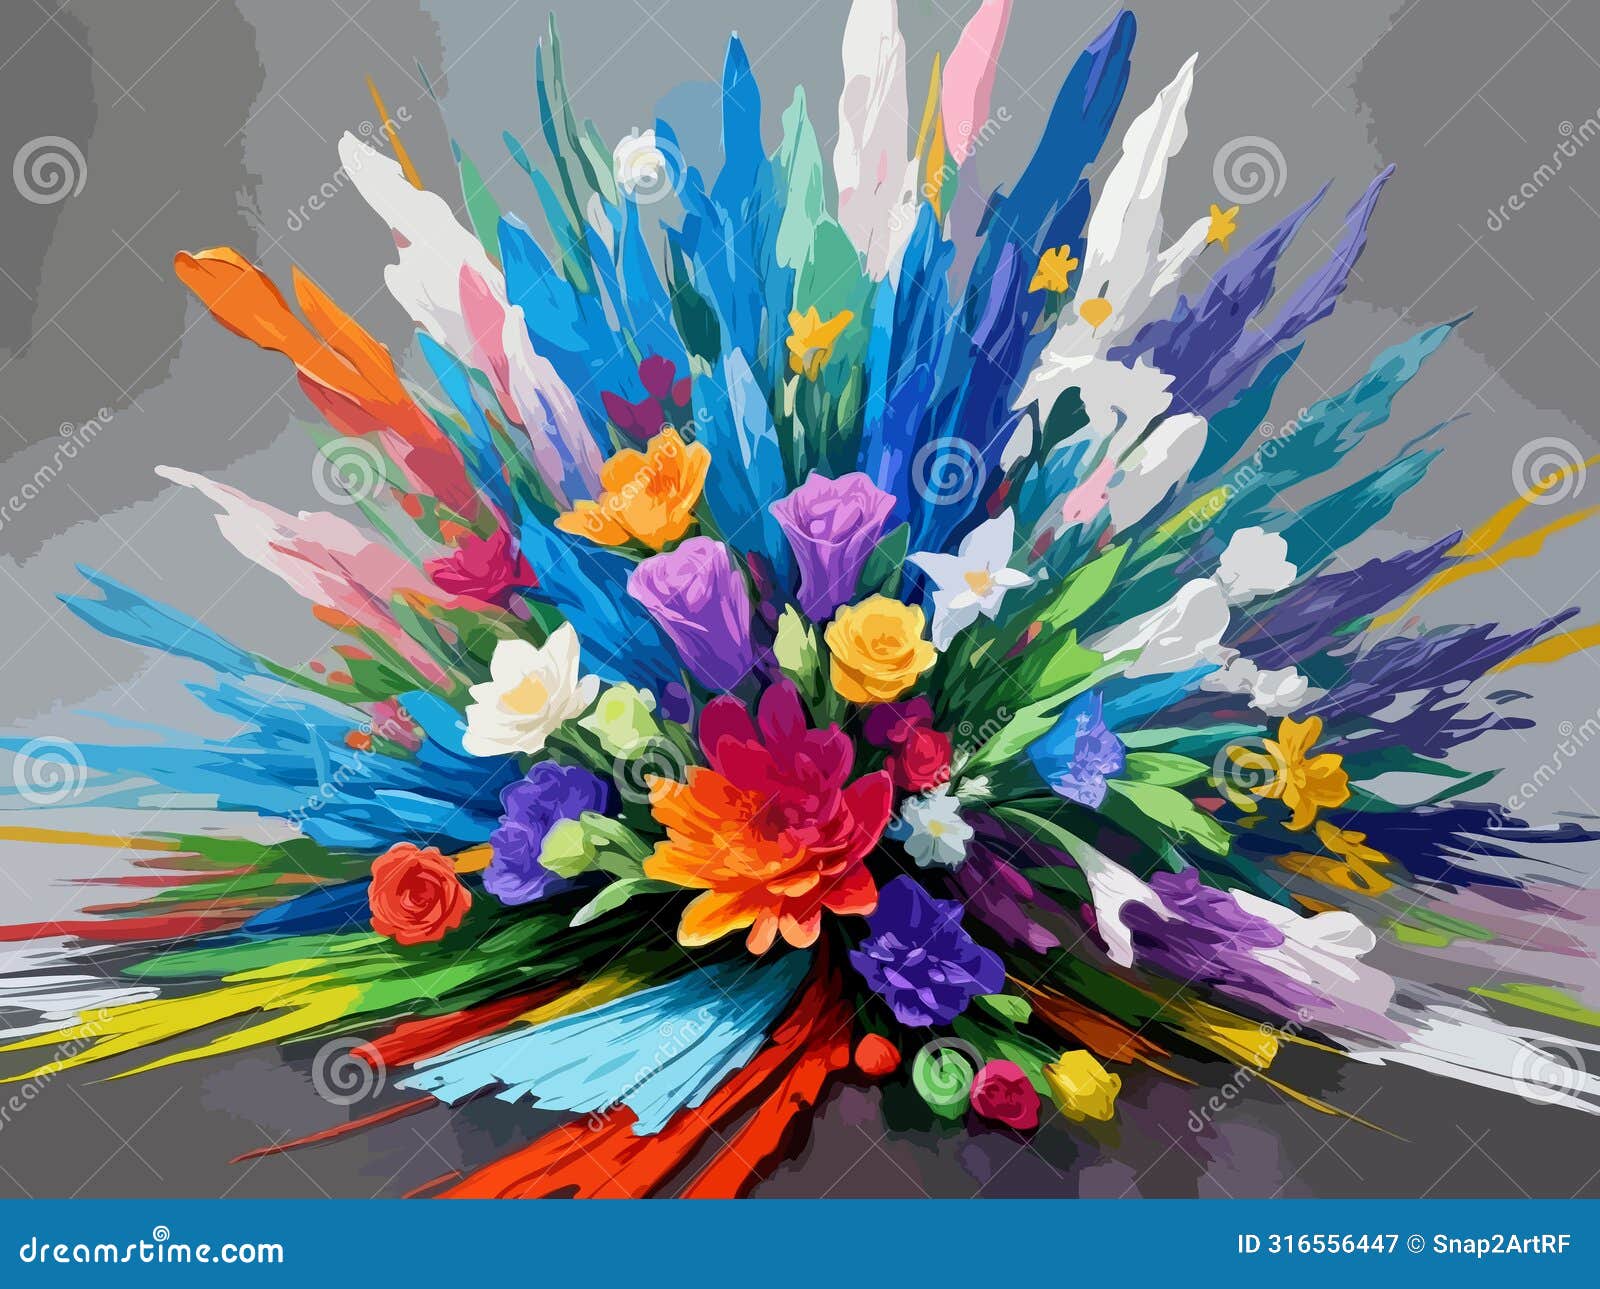 high detailed full color  - exuberant bloom soft edged image - an expressive floral rhapsody